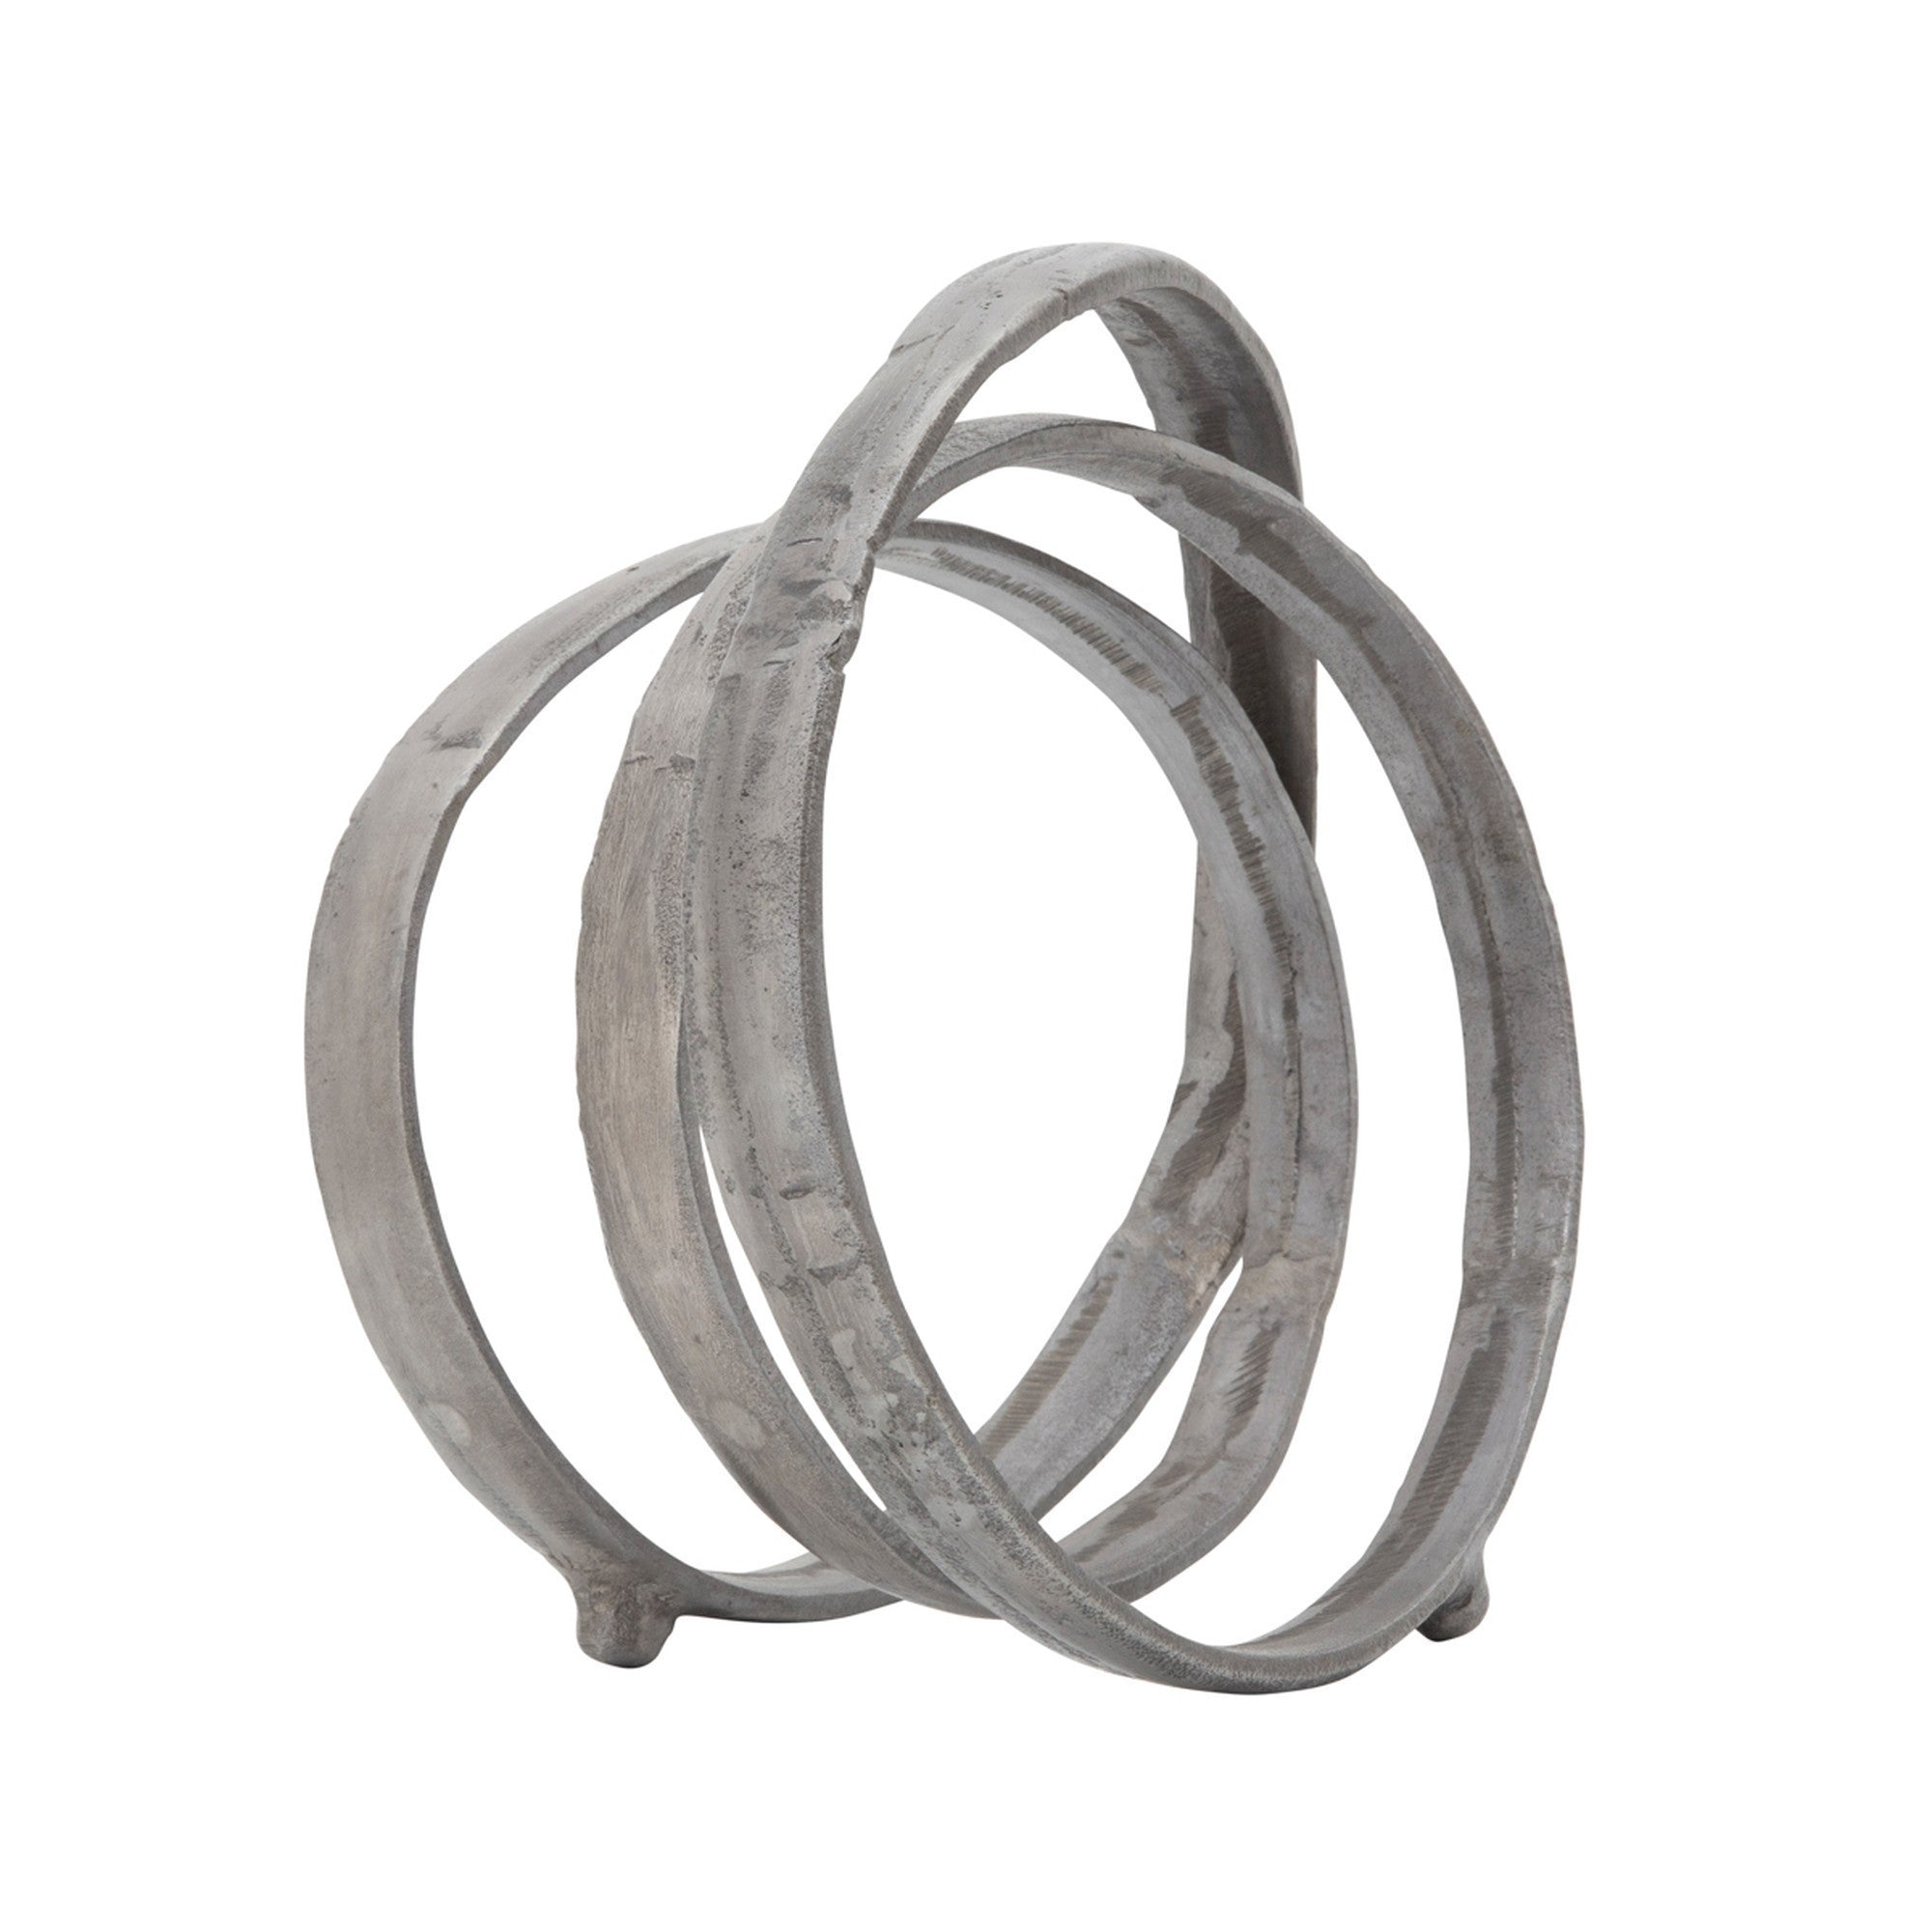 Sculpture with Metal Interconnected Ring Design,